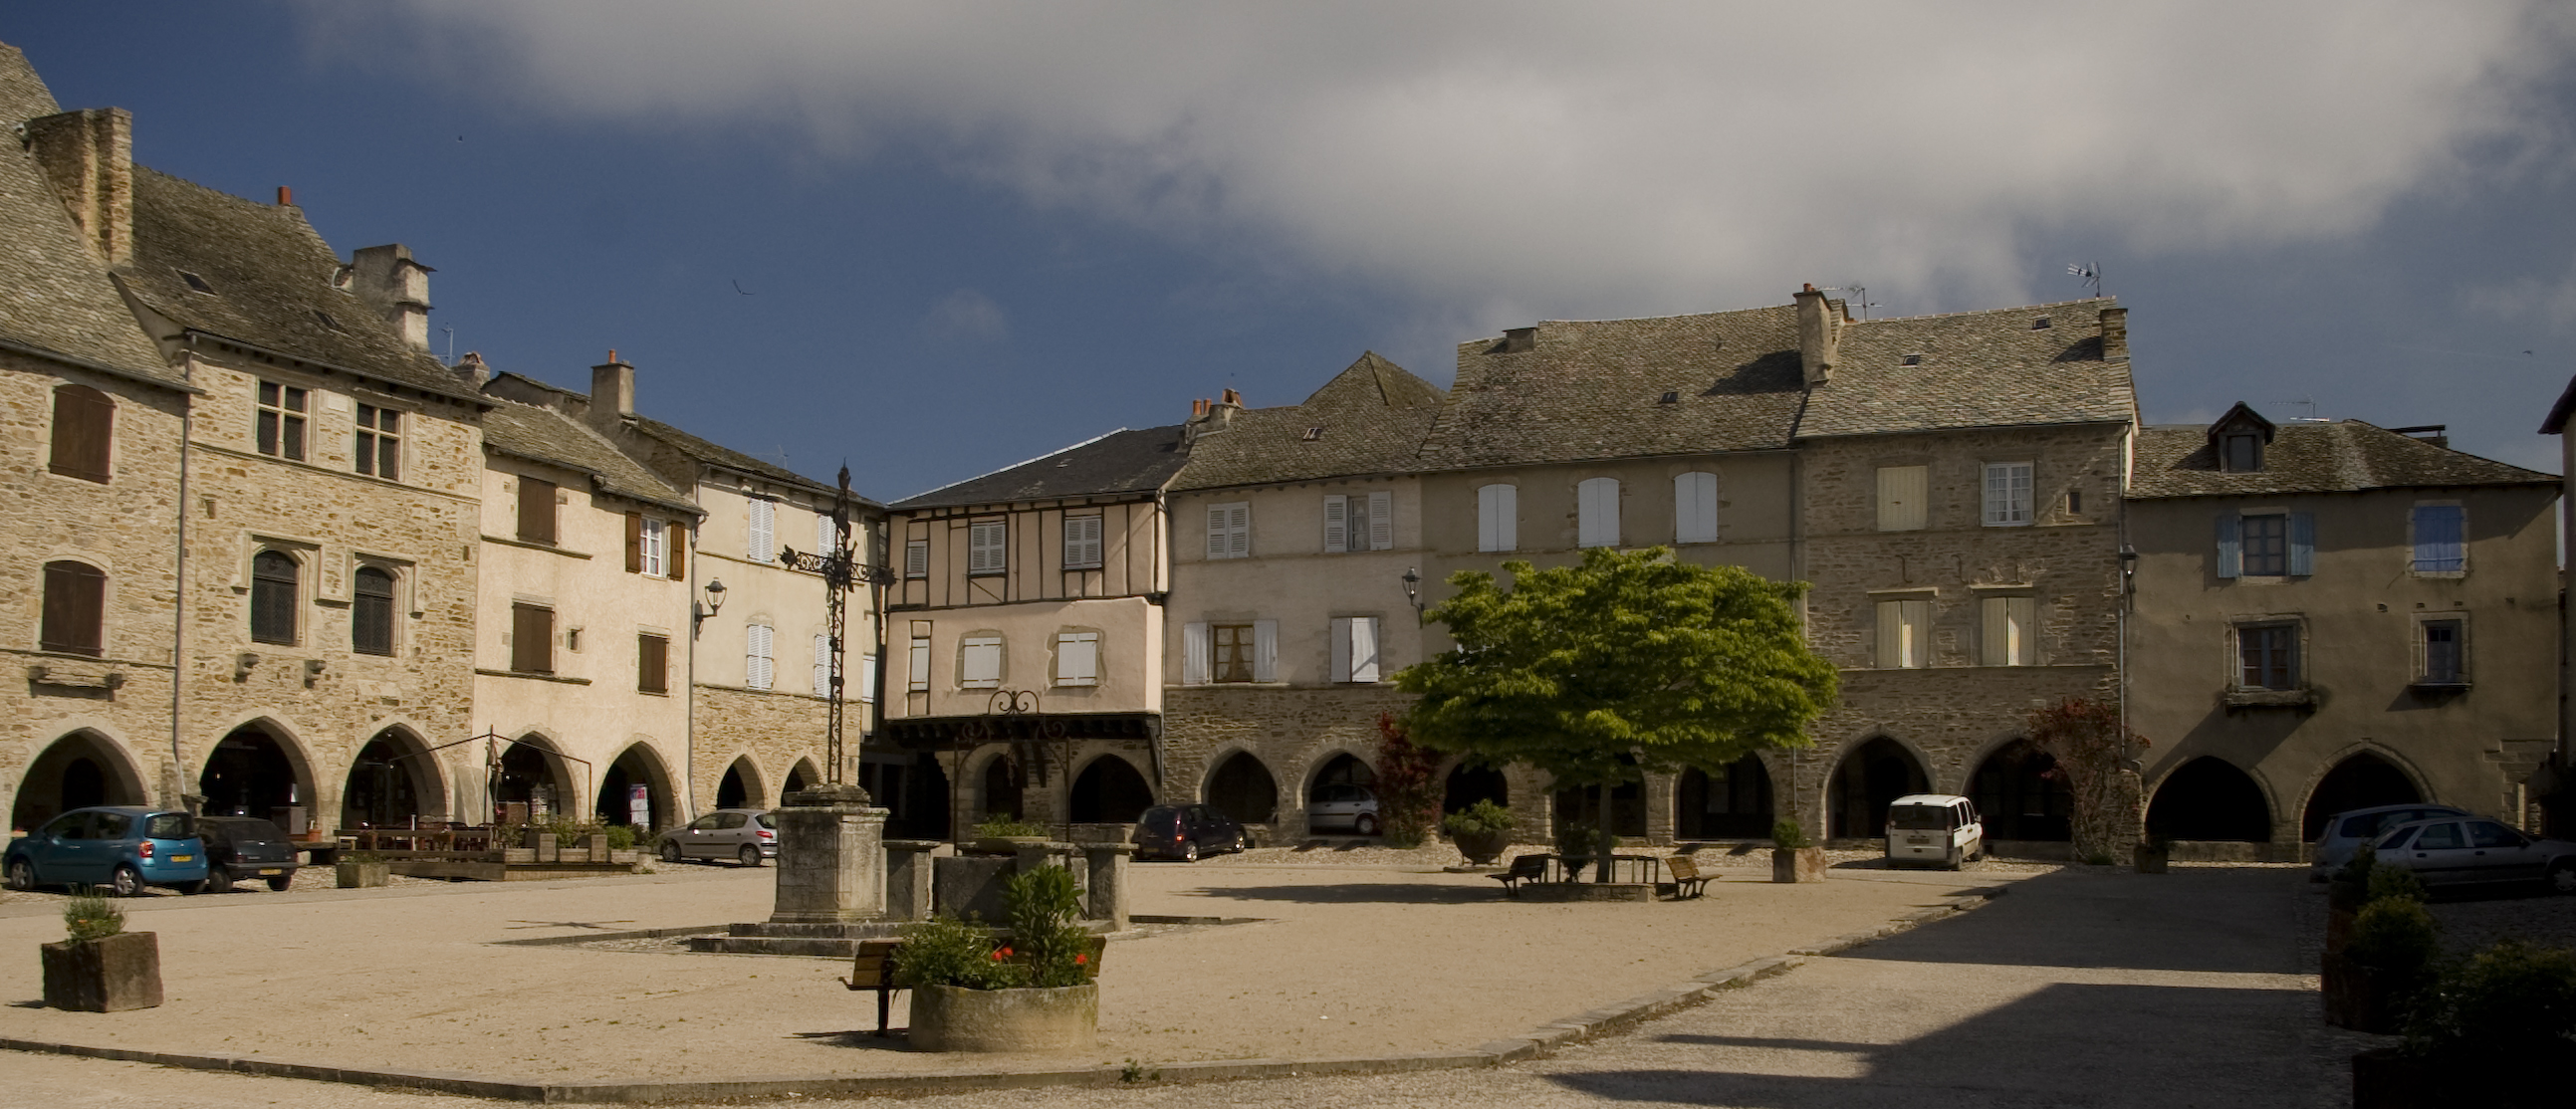 an image of a courtyard in the middle of town